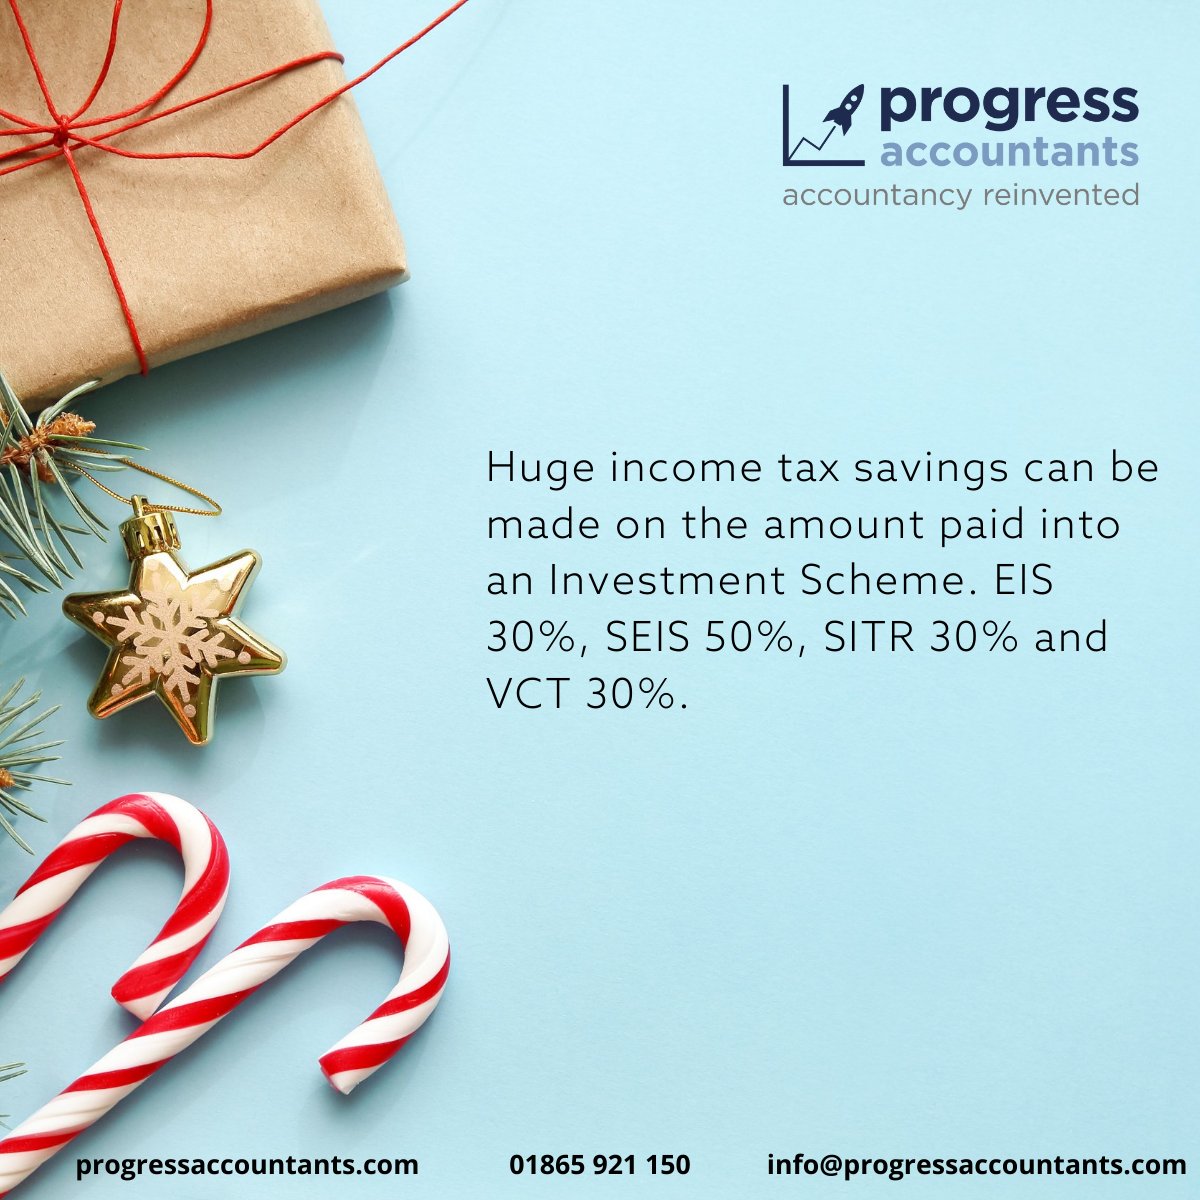 Day 10: Save on Income Tax #Christmas #Accounting #ProfessionalServices #12DaysofChristmas 🎄